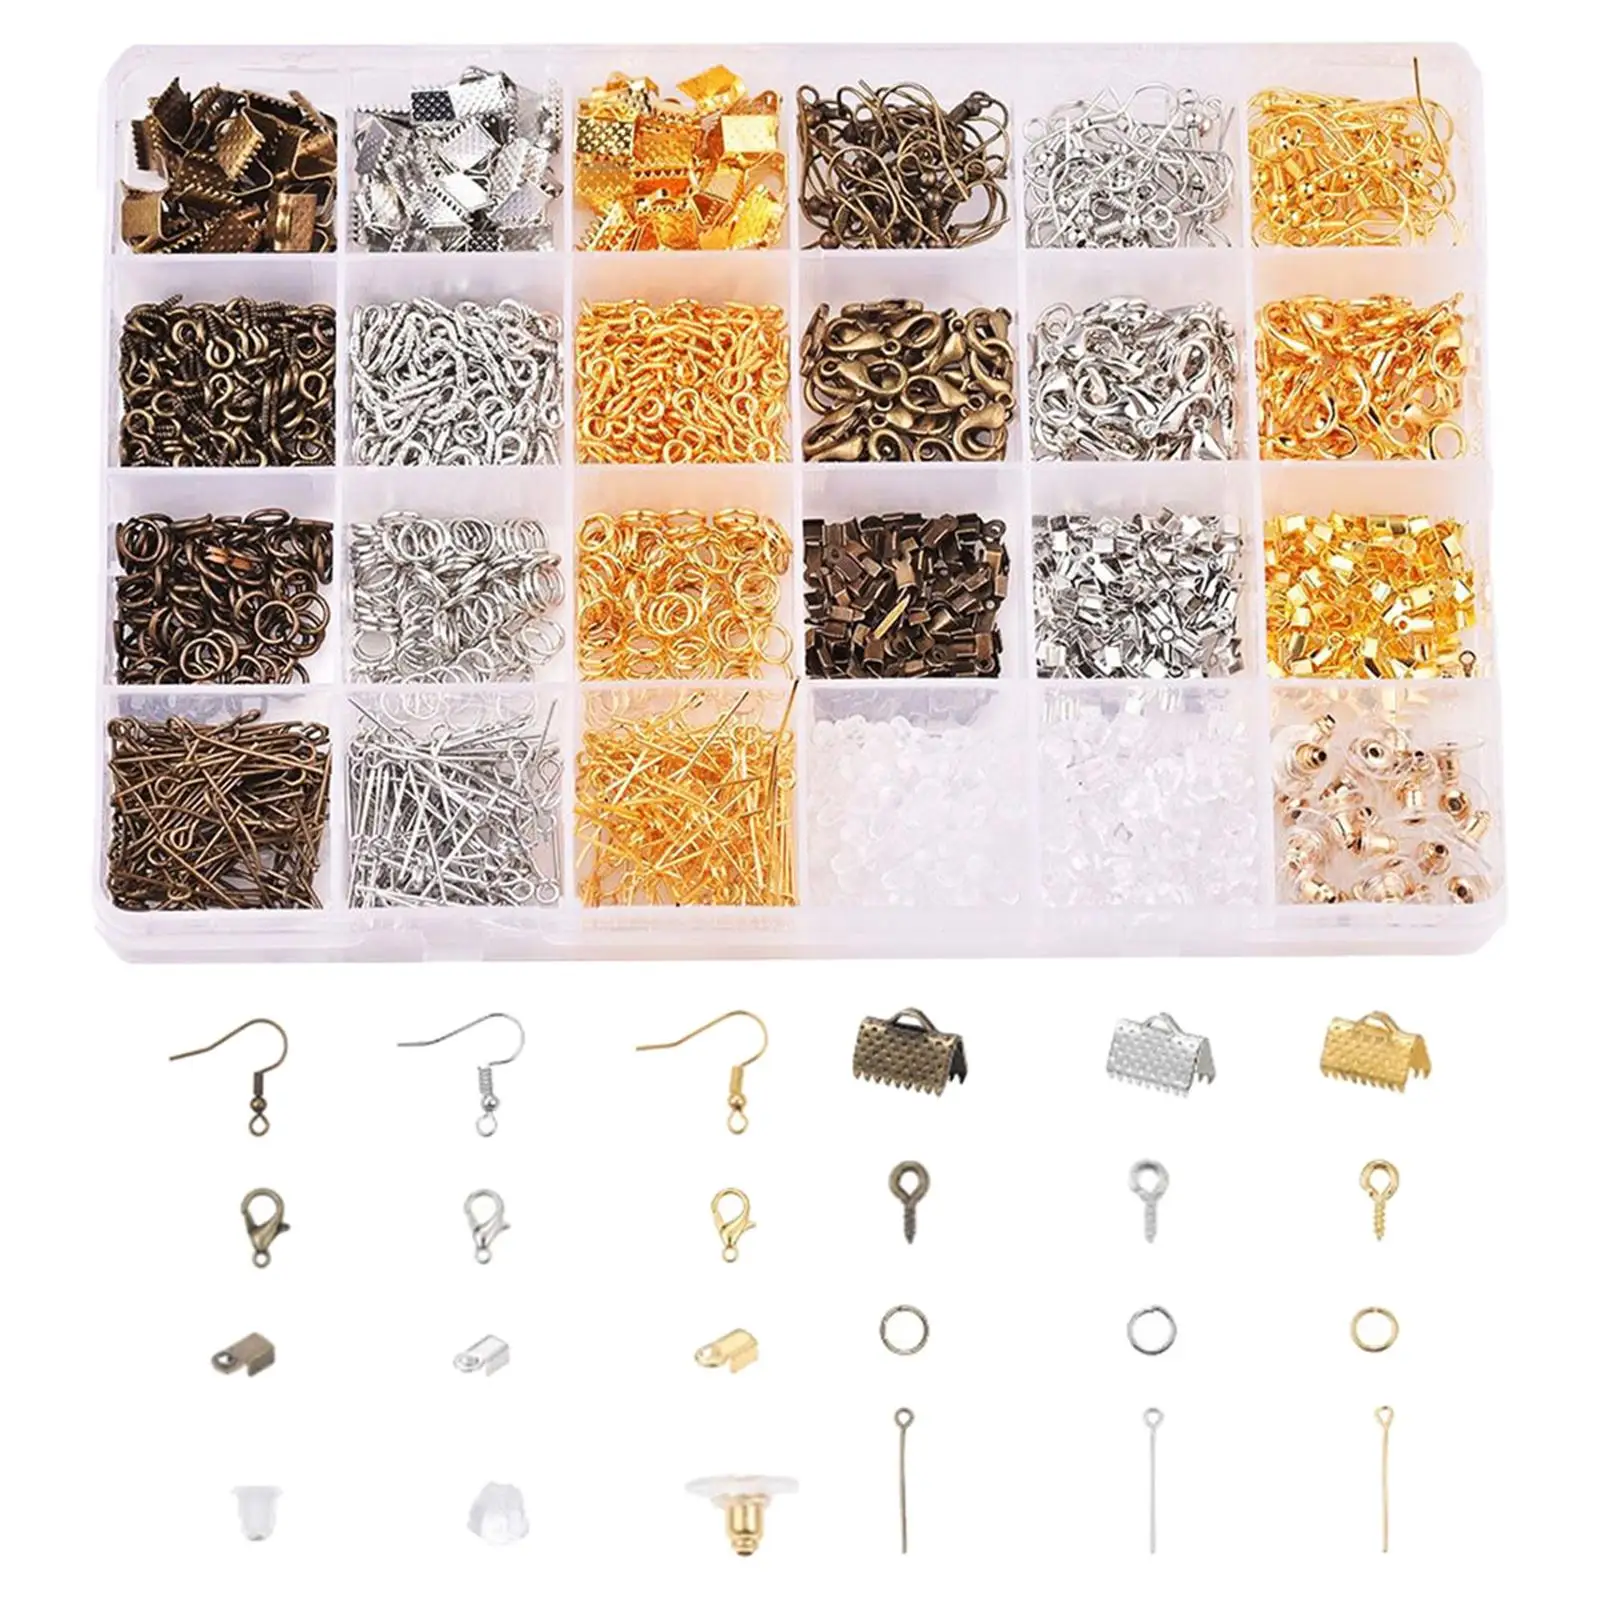 1700x Earring Making Supplies Kit Eye Pins Earring Hooks Earring Finding for Necklace Handmade Crafts Jewelry Making Repair